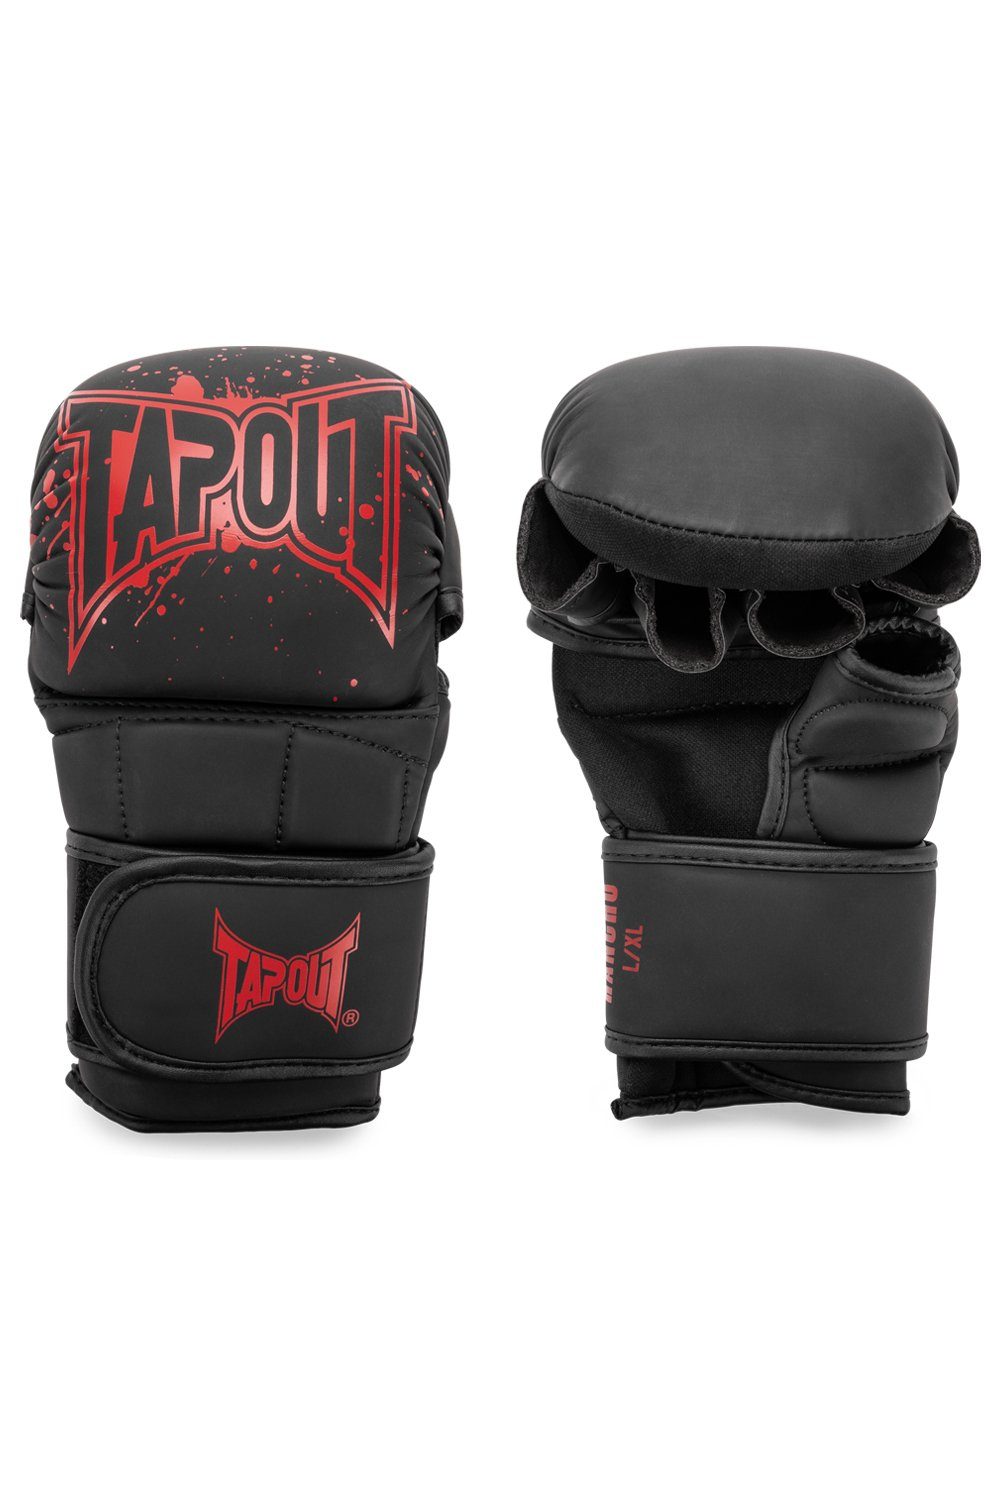 RANCHO TAPOUT Boxhandschuhe